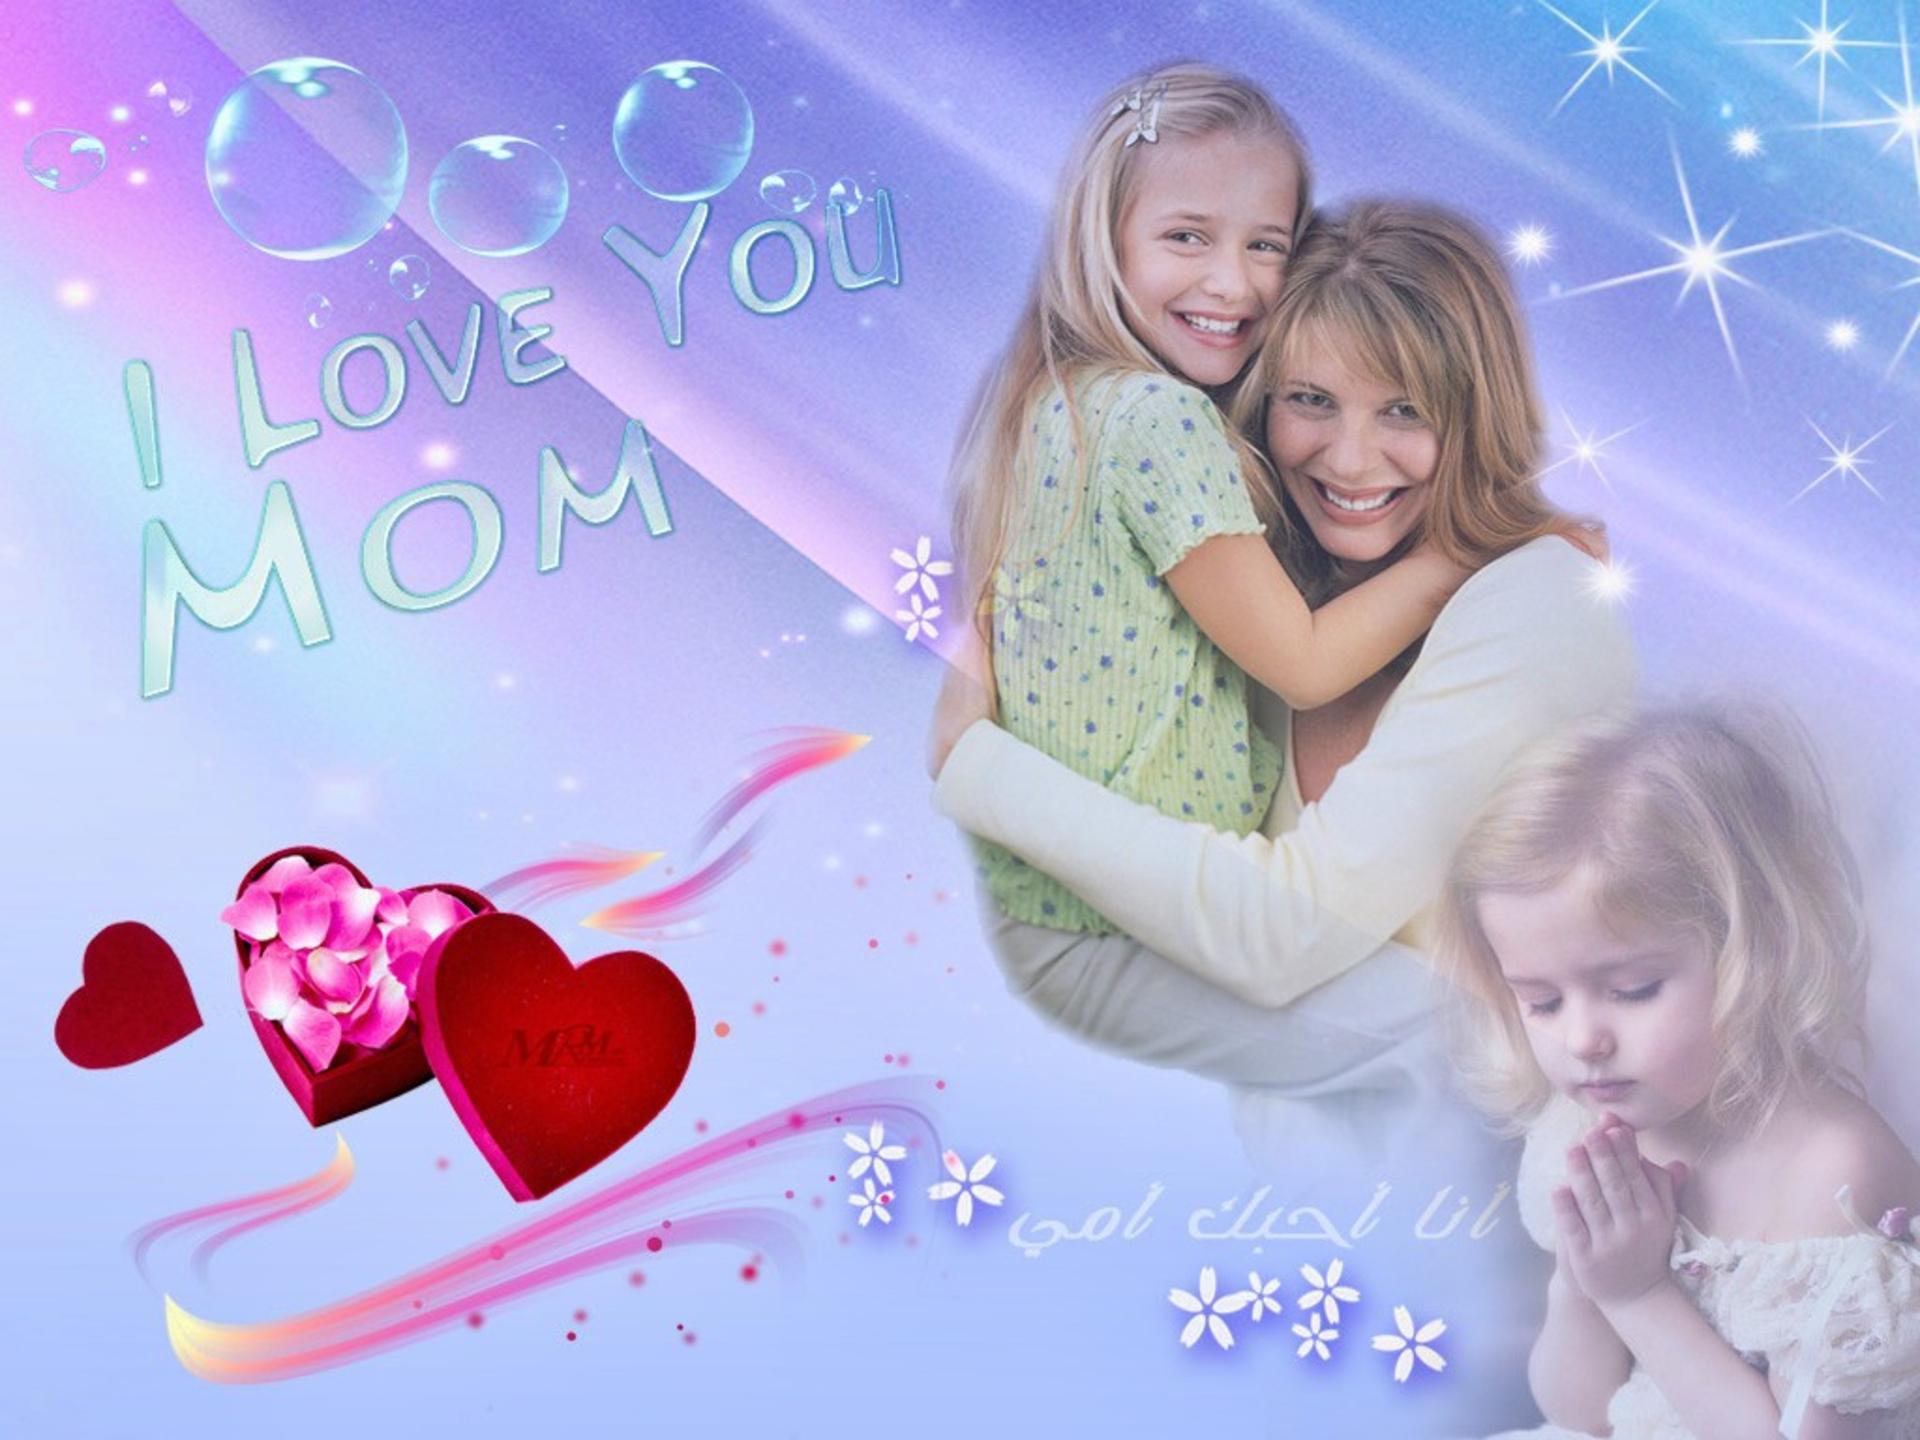 Free Download Love You Mom Backgrounds 7745 Hd Wallpapers In Love Imagescicom 19x1440 For Your Desktop Mobile Tablet Explore 45 Mom Wallpapers I Love You Mom Wallpaper Free Mothers